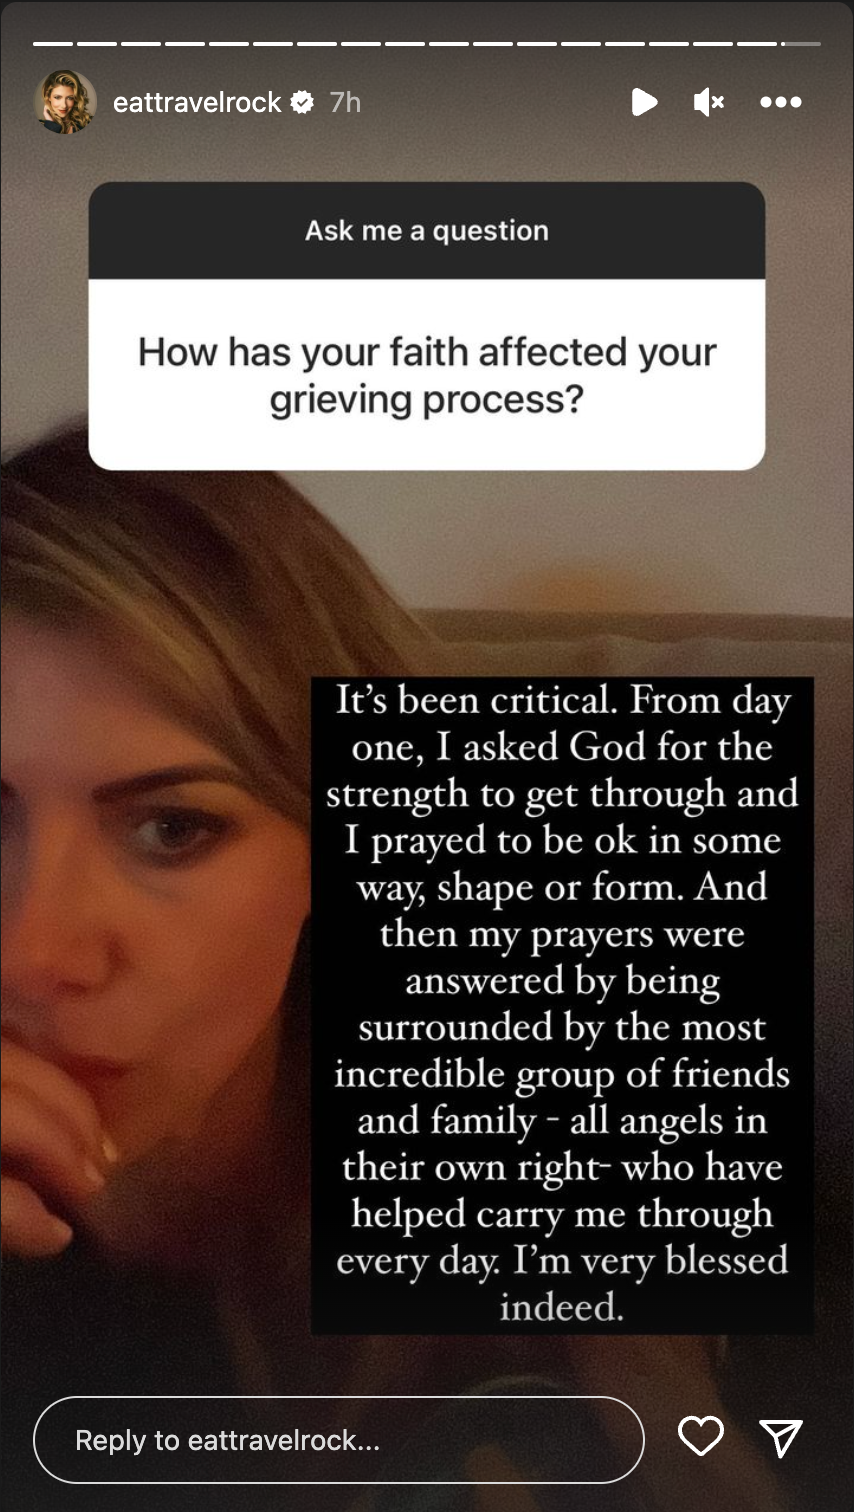 Kelly Rizzo talks about faith's role in her grief journey